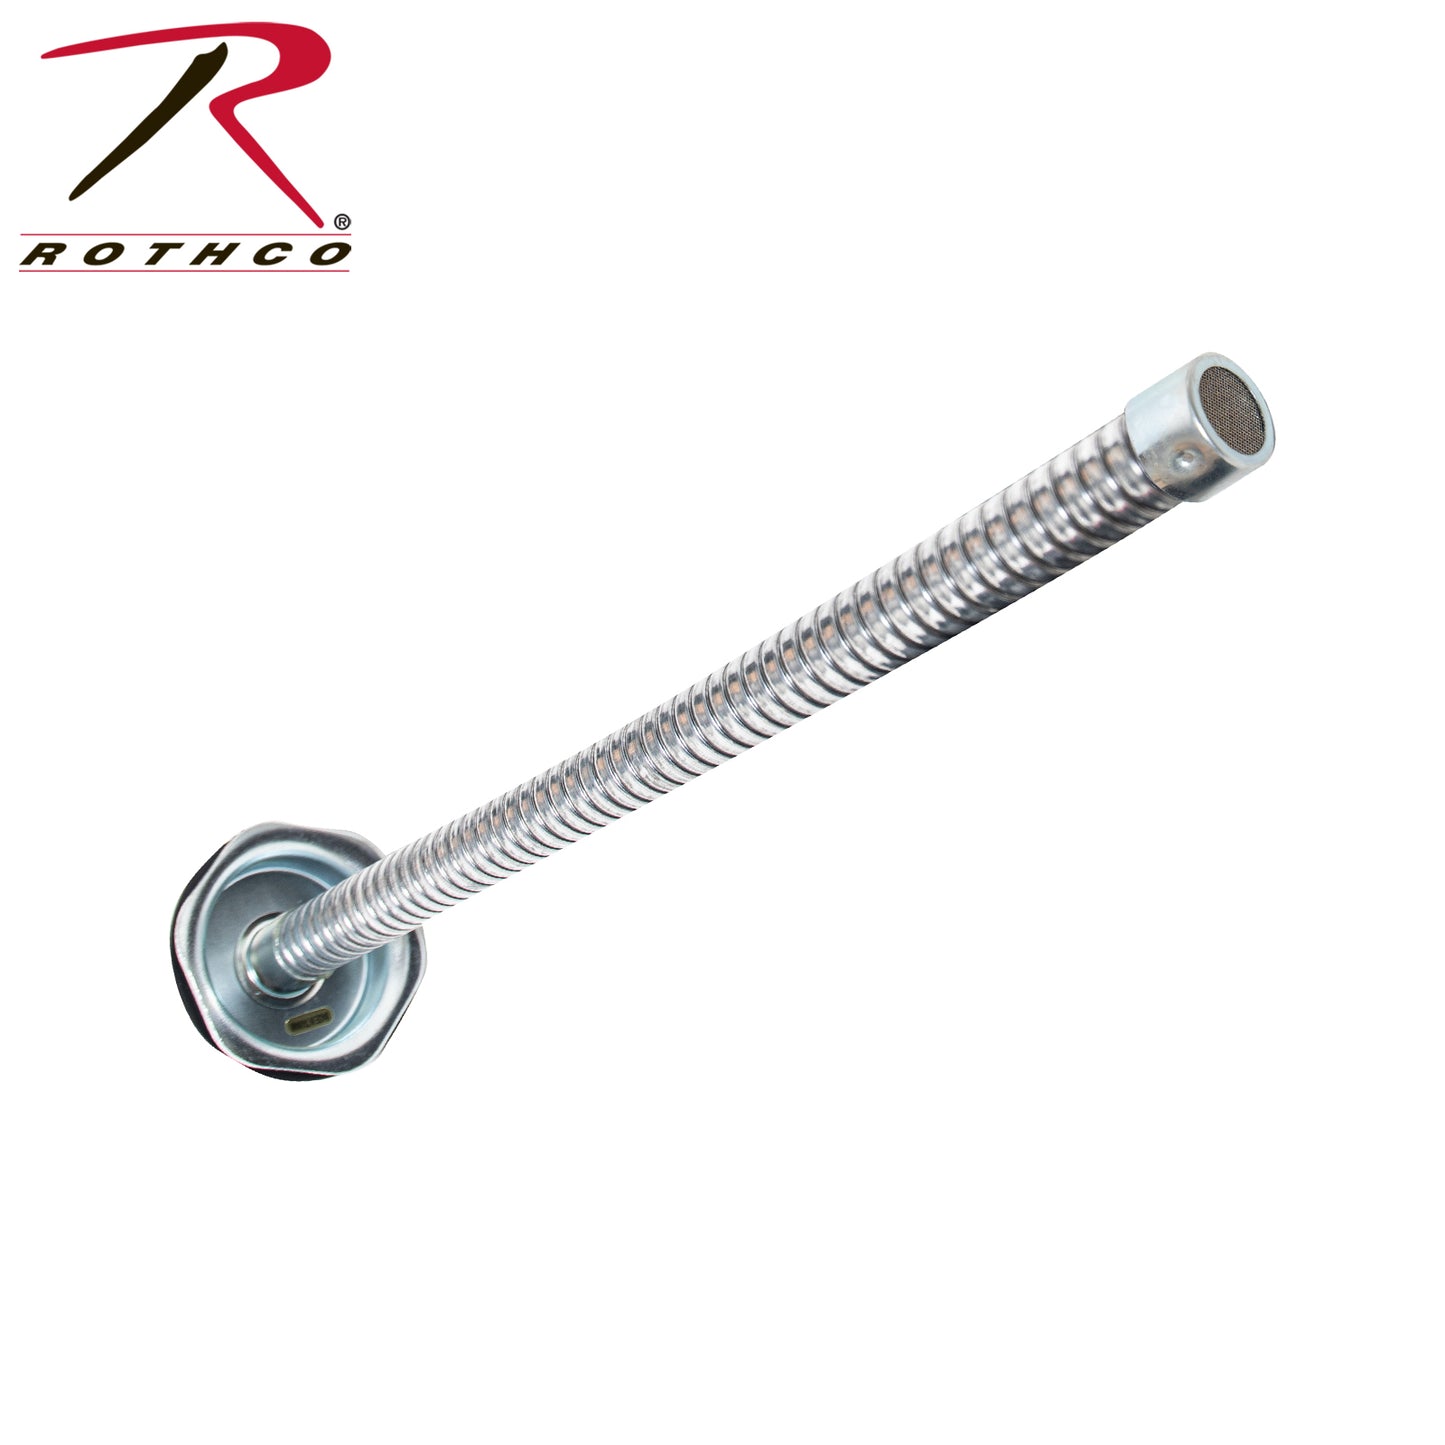 Rothco G.I. Type Screw-On Gas Nozzle